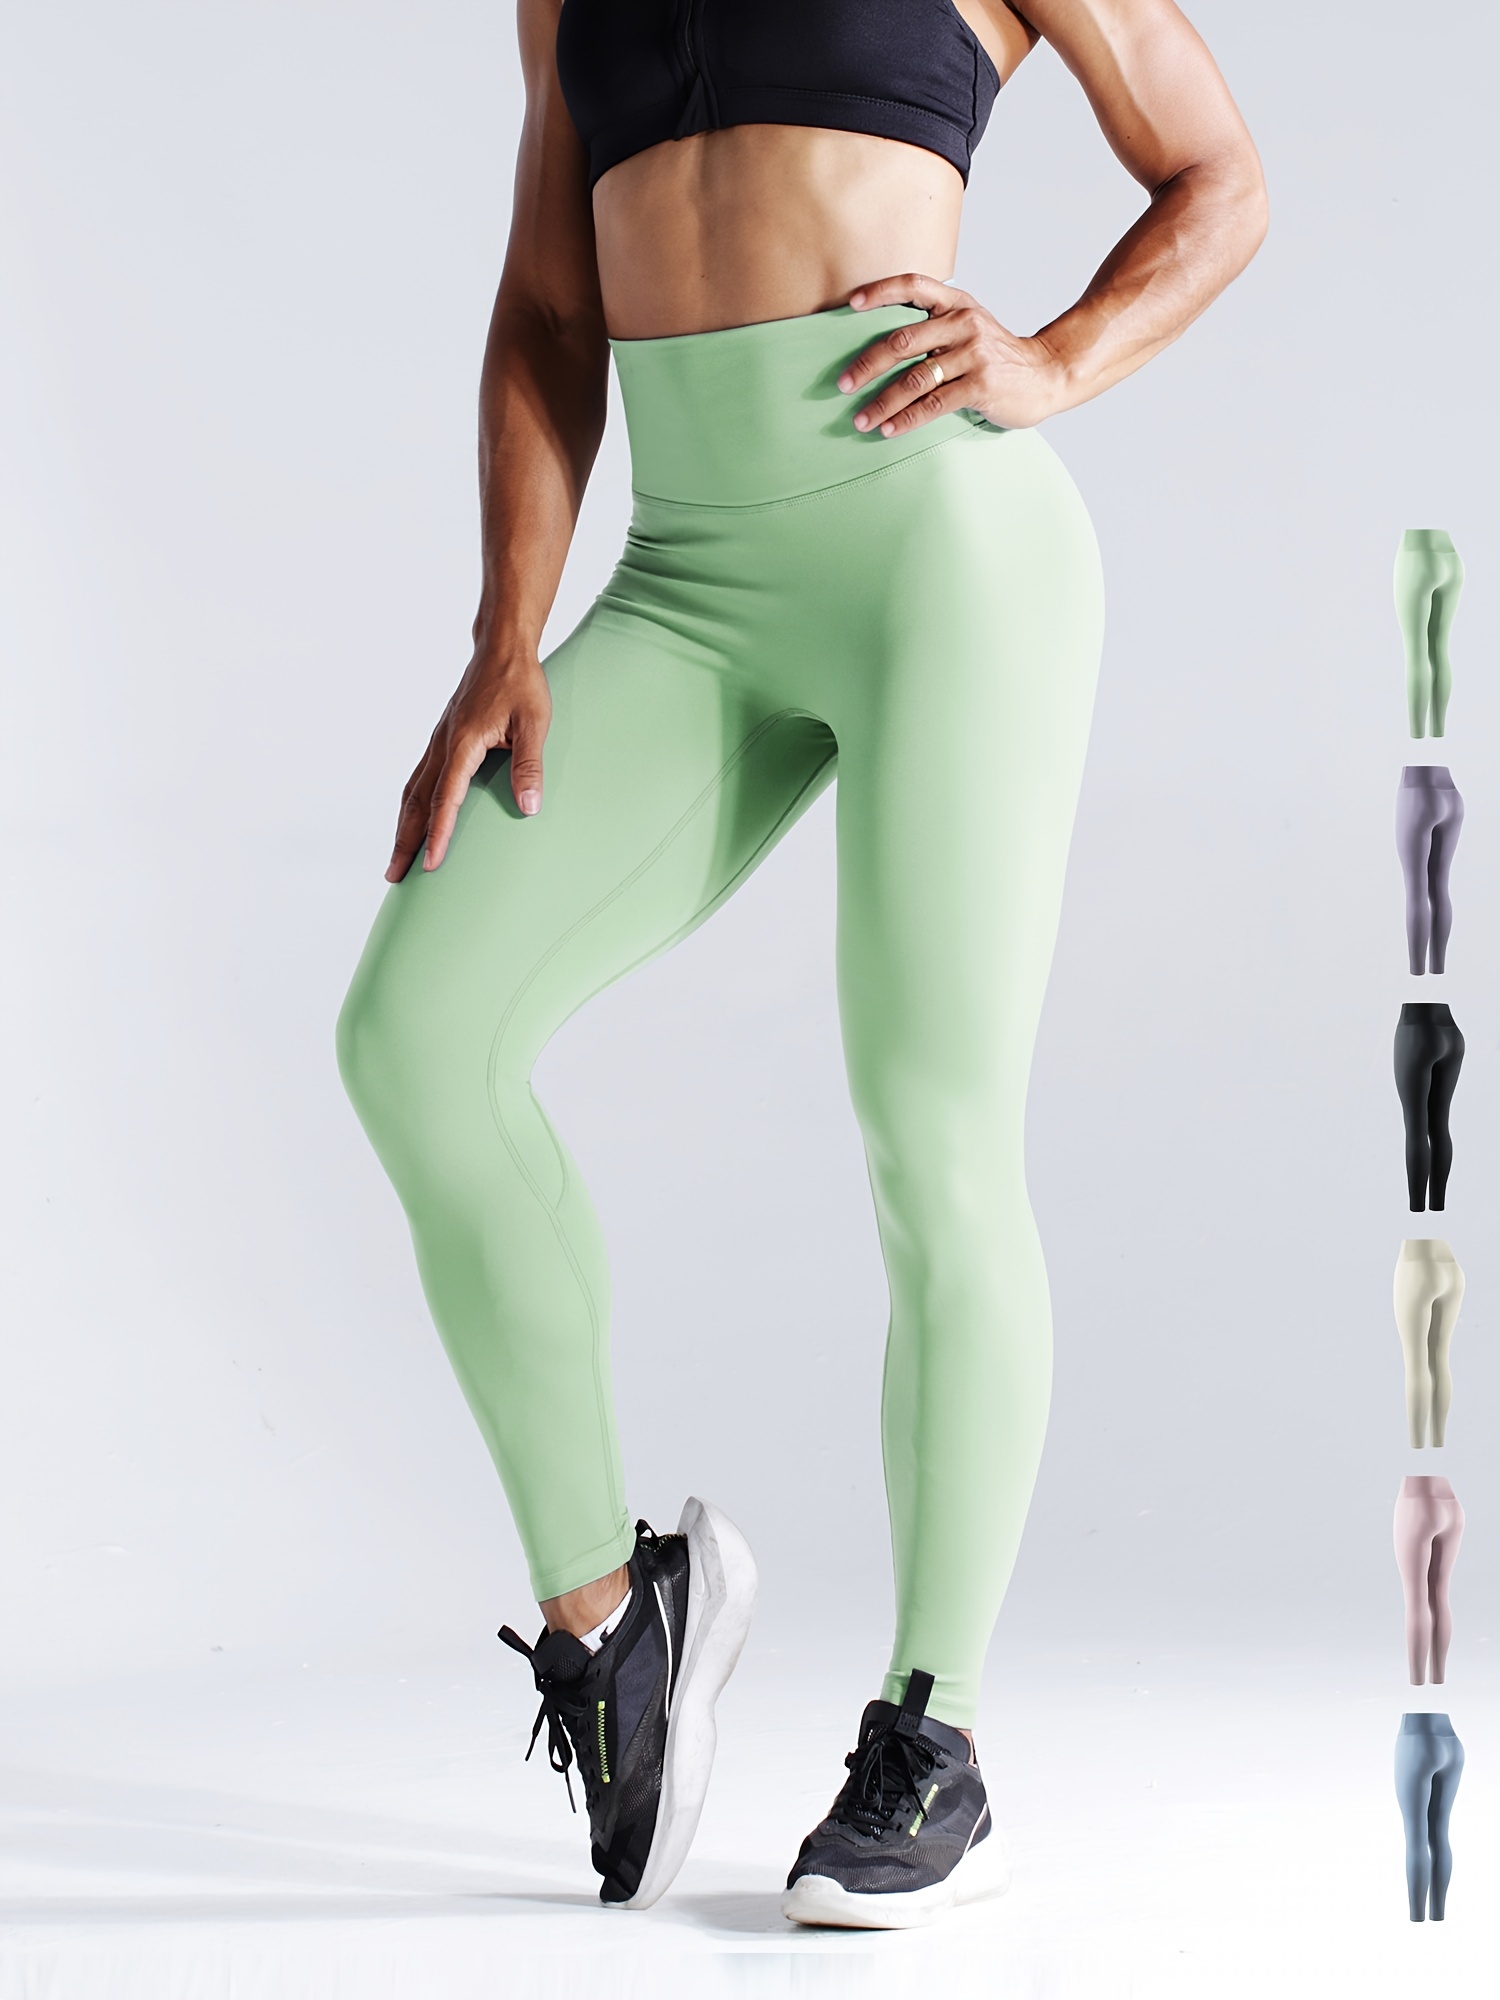  Gang-LL Tights Leggings Fitness Yoga Pants Running Sports  Leggings Tights NCLAGEN High Waist Squat Proof Elastic Butt Lift GYM Sports  Workout (Color: Mint Green, Size: M) : Clothing, Shoes & Jewelry